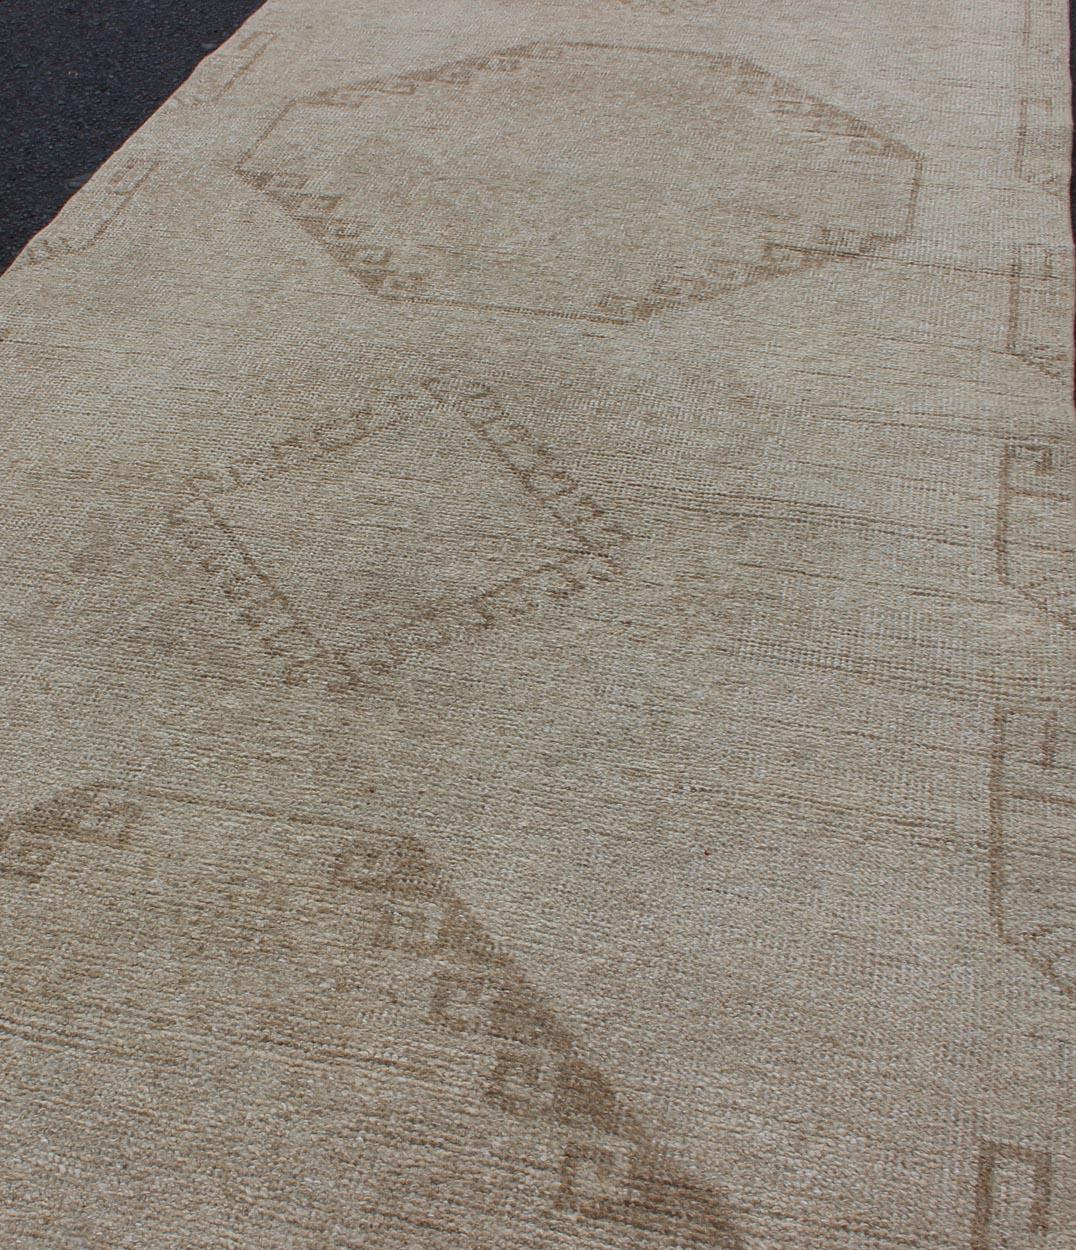 Grey and Cream Vintage Turkish Oushak Runner with Geometric Tribal Design In Good Condition For Sale In Atlanta, GA